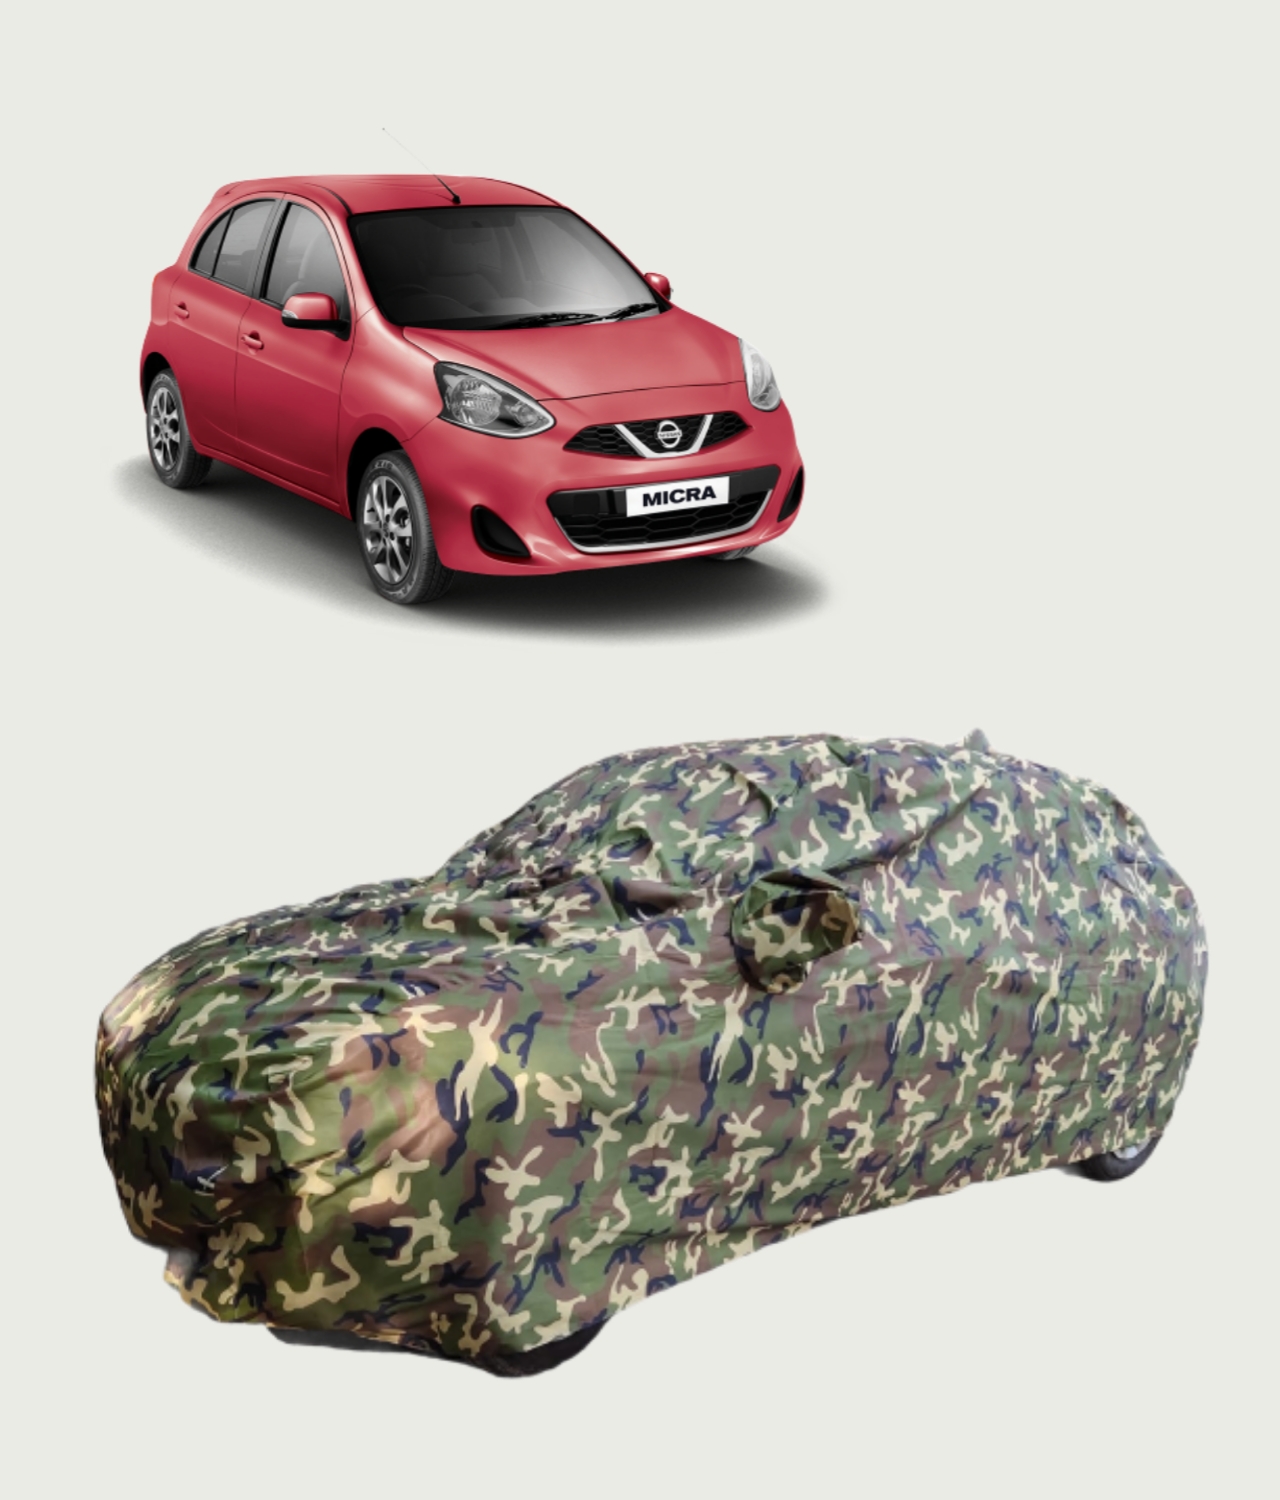 Buy Waterproof Car Body Cover For Nissan Micra Online at Best in India..